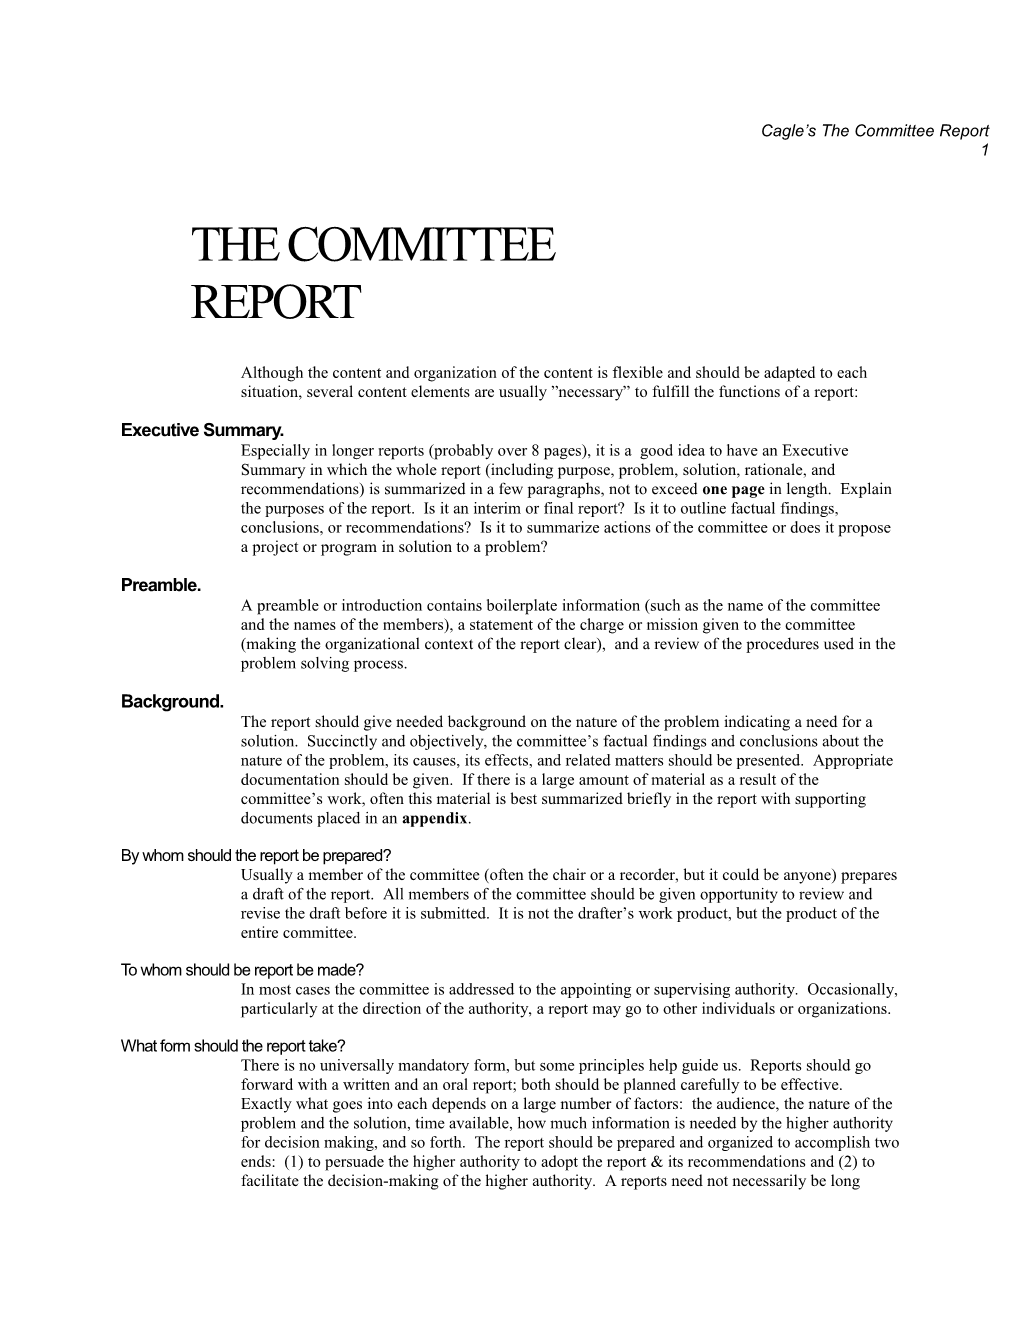 The Committee Report